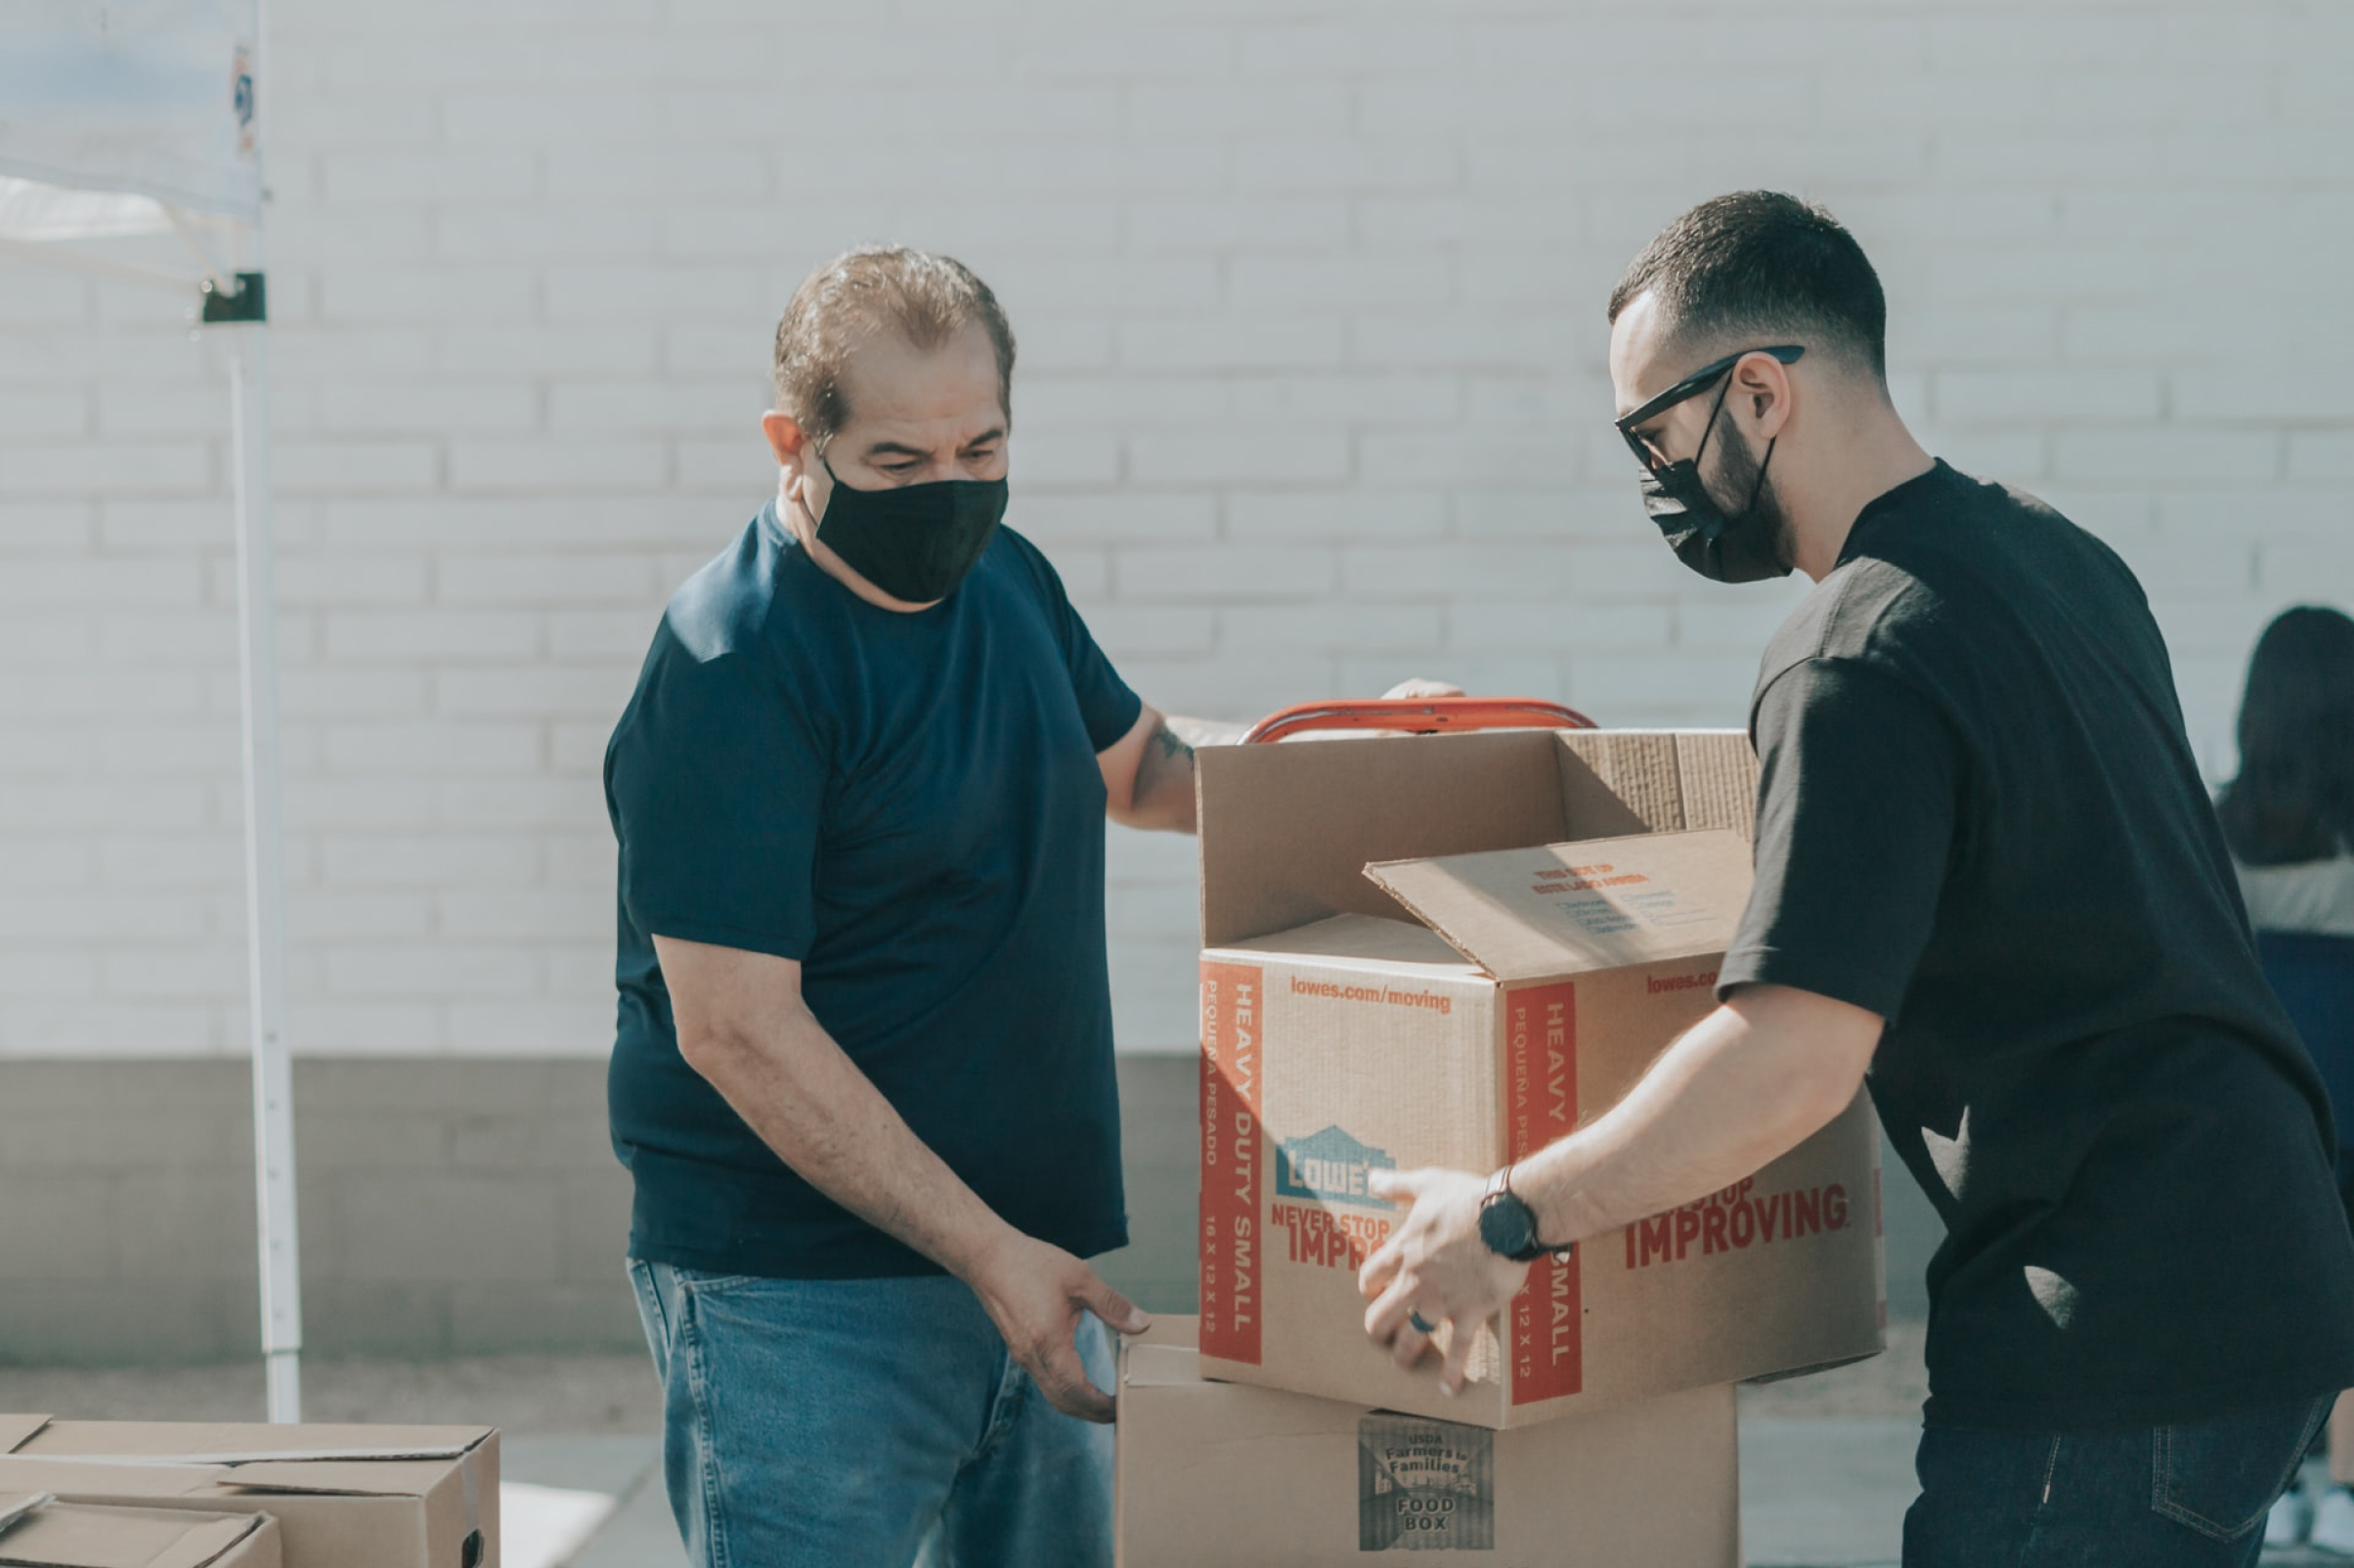 Two men working together to lift boxes.